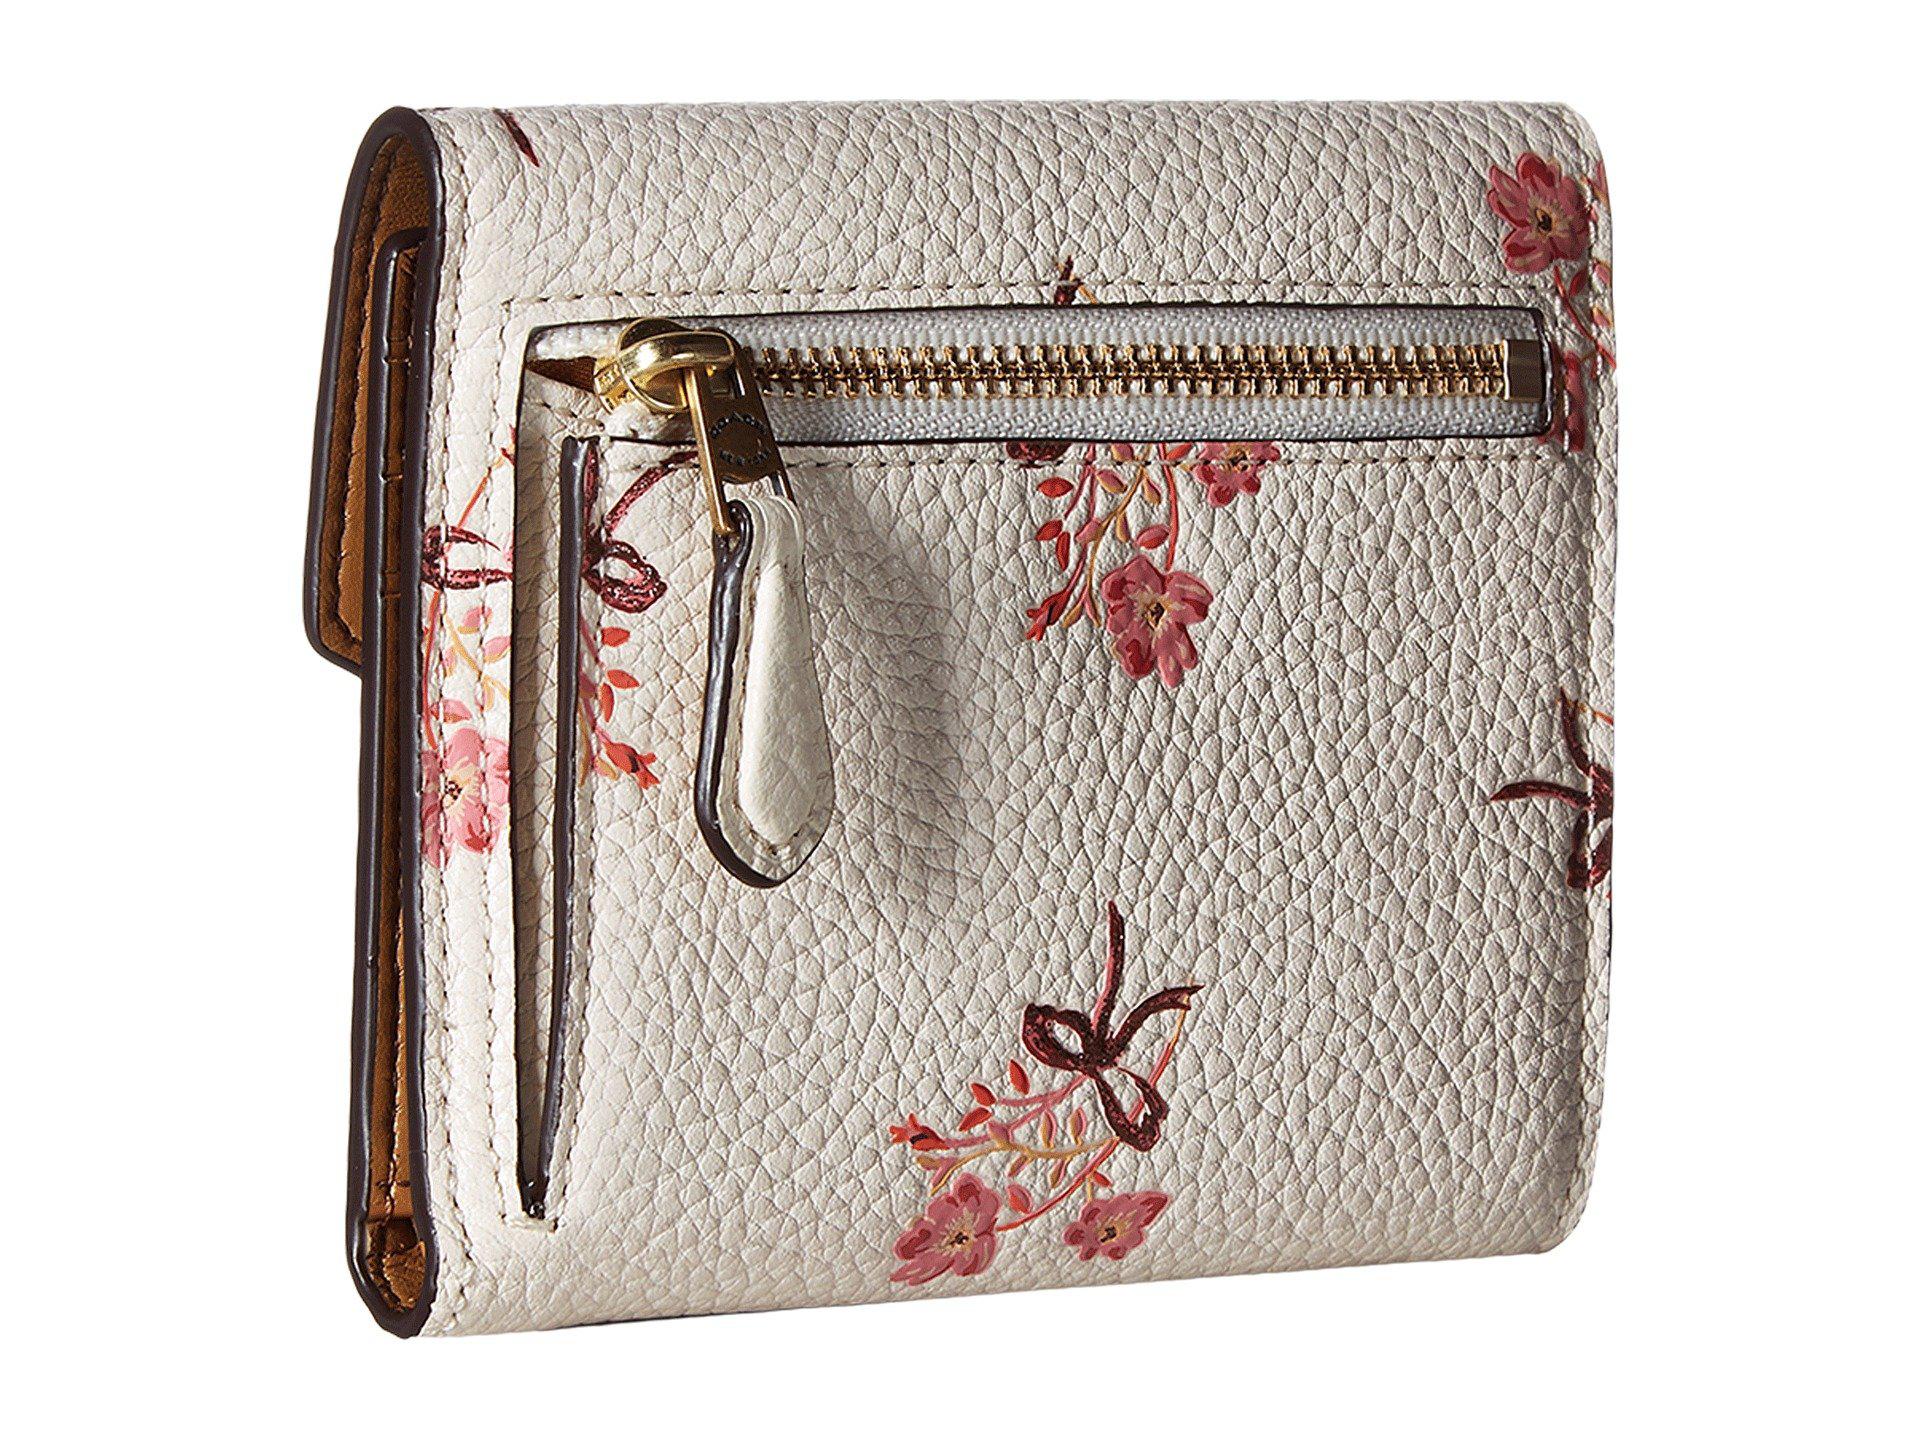 NEW Coach Small Wallet only in Dreamy Butterfly Bi-fold Floral Veggie print